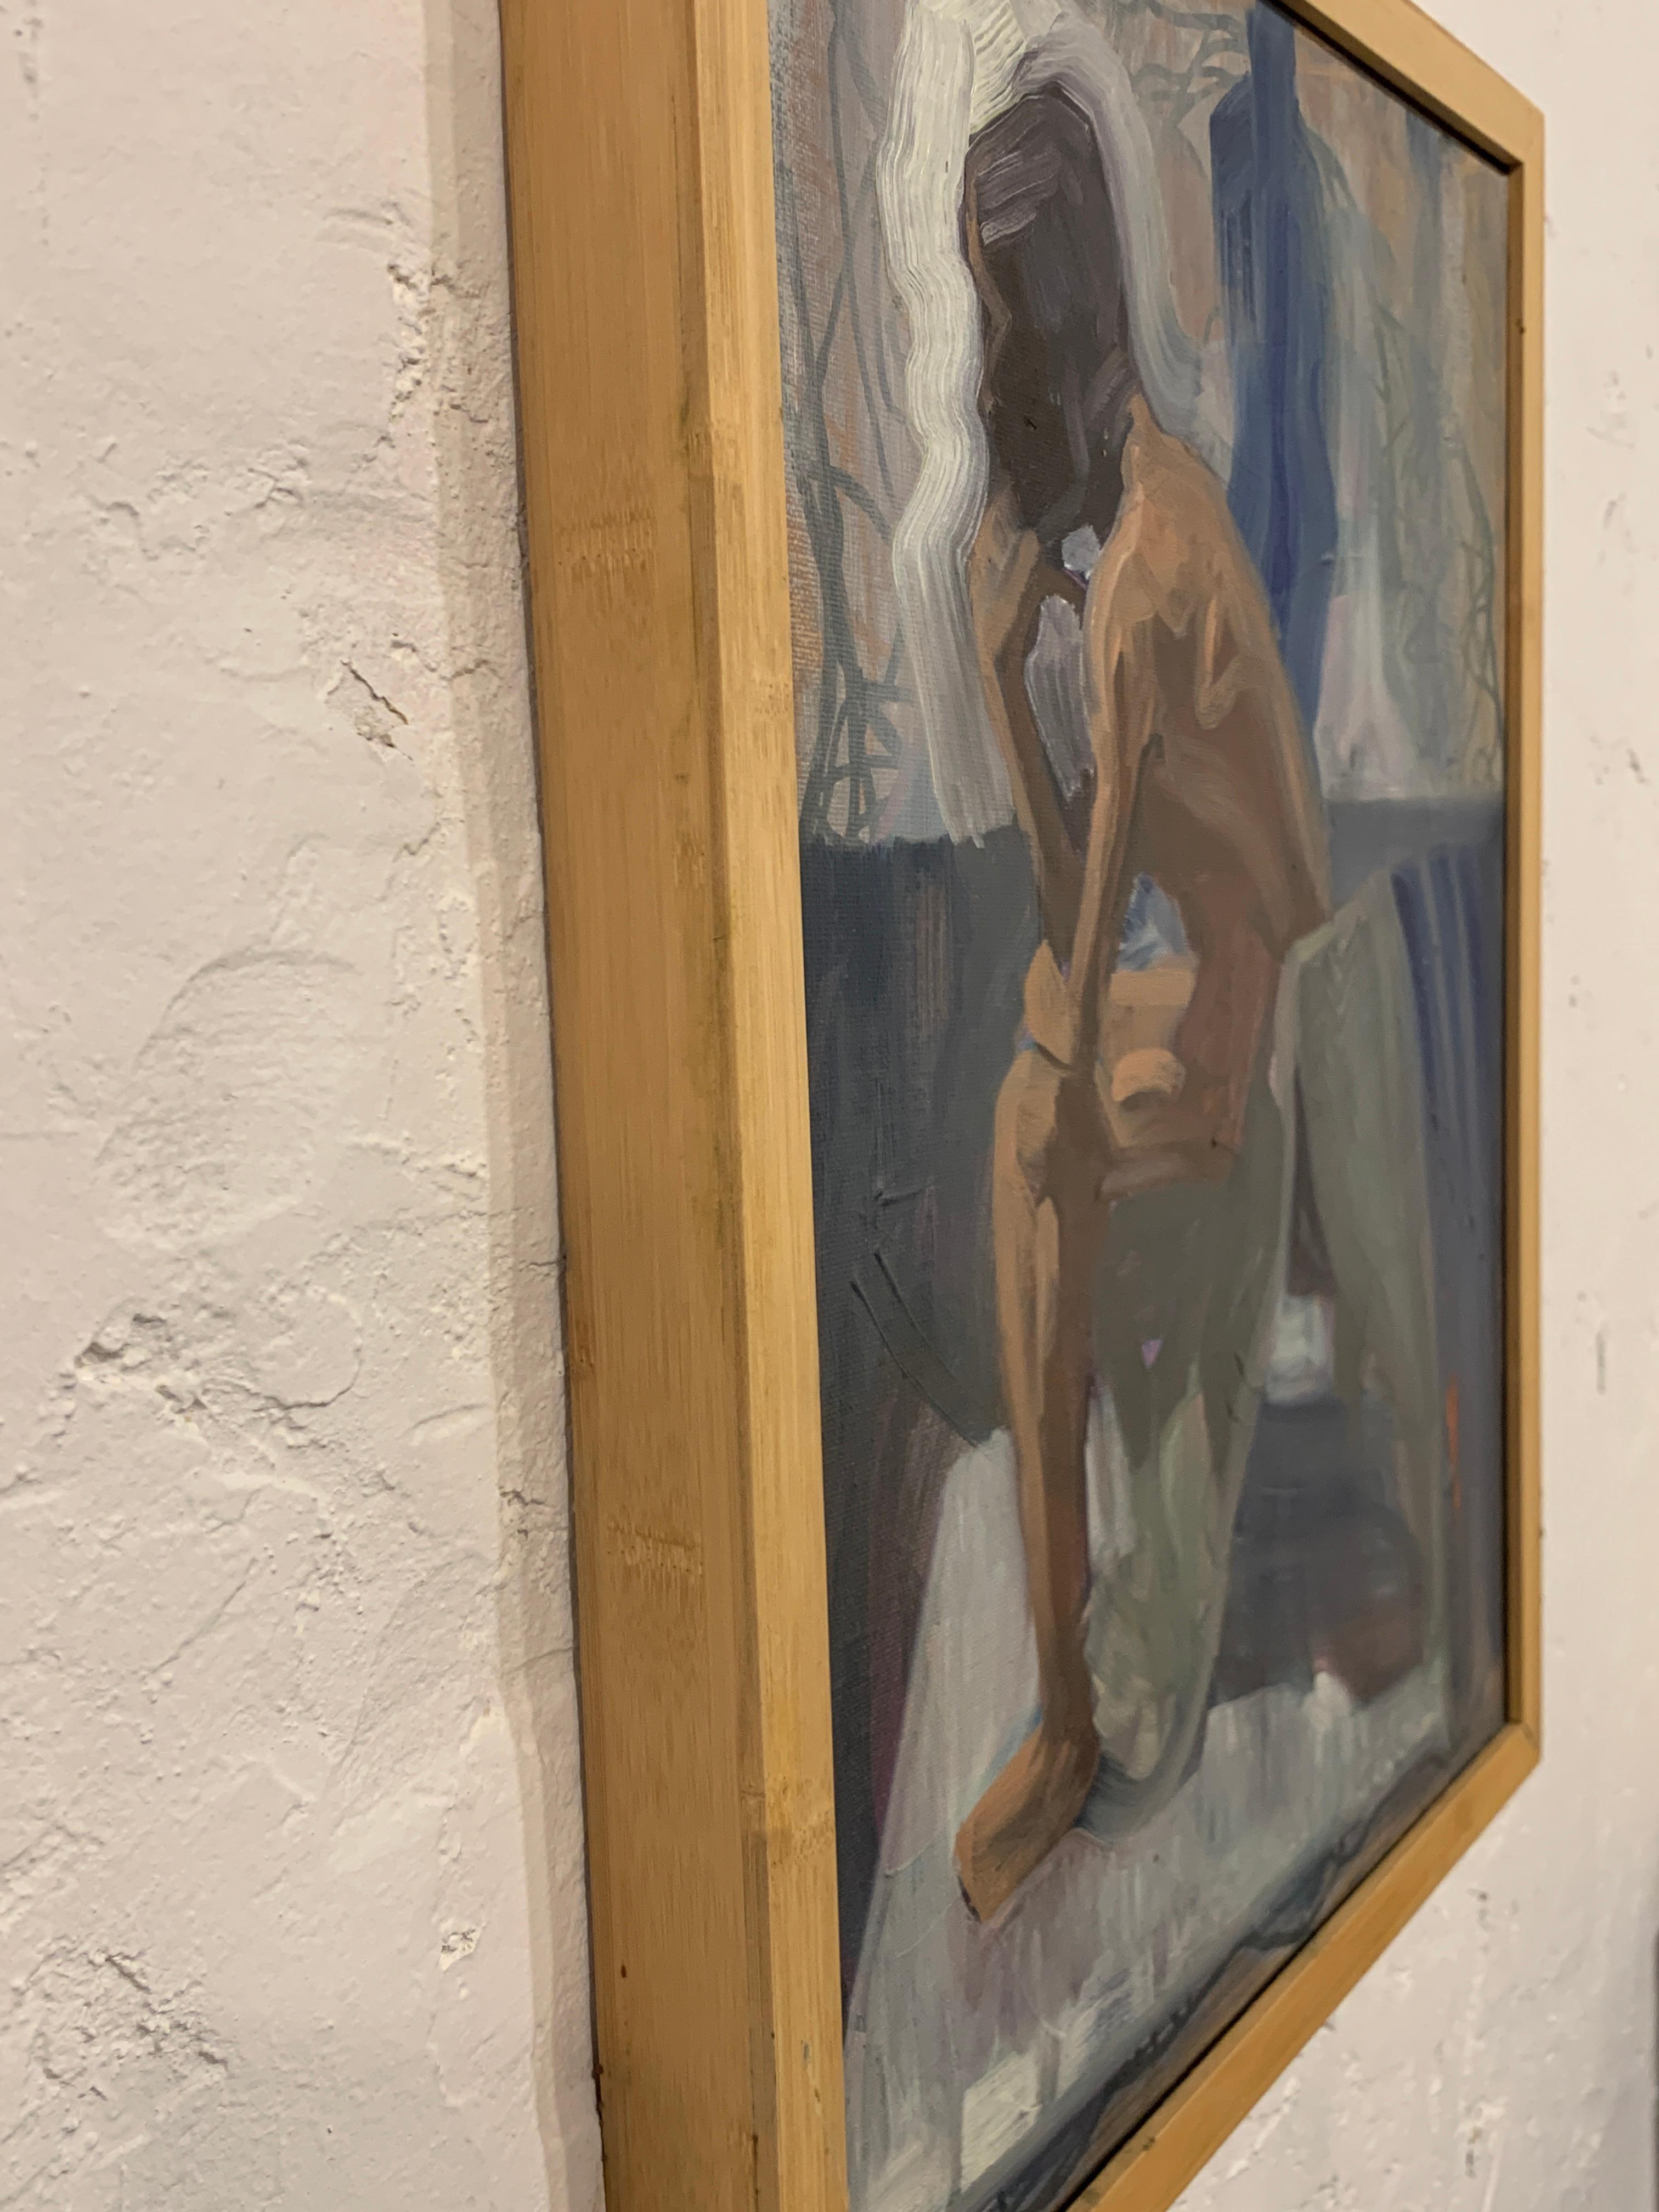 LIKE THE COLOR OF LICHEN - Figurative Painting, Blue, Wood Frame, Male Nude 1